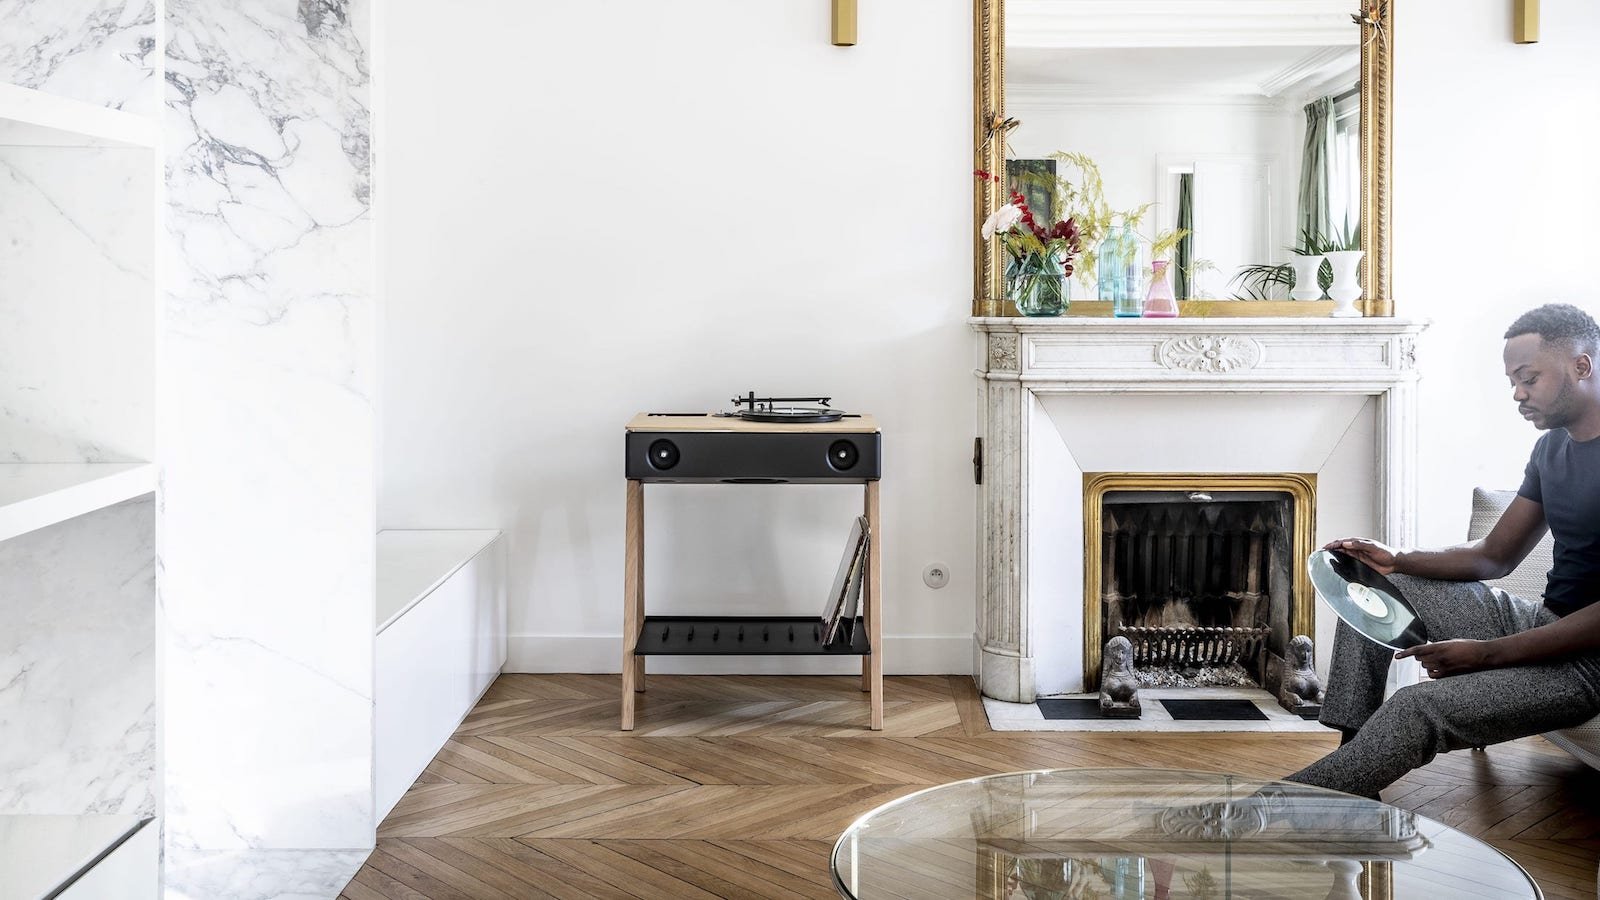 La Boite LX Turntable includes 5 speakers, 315 watts of power, and a minimalist design